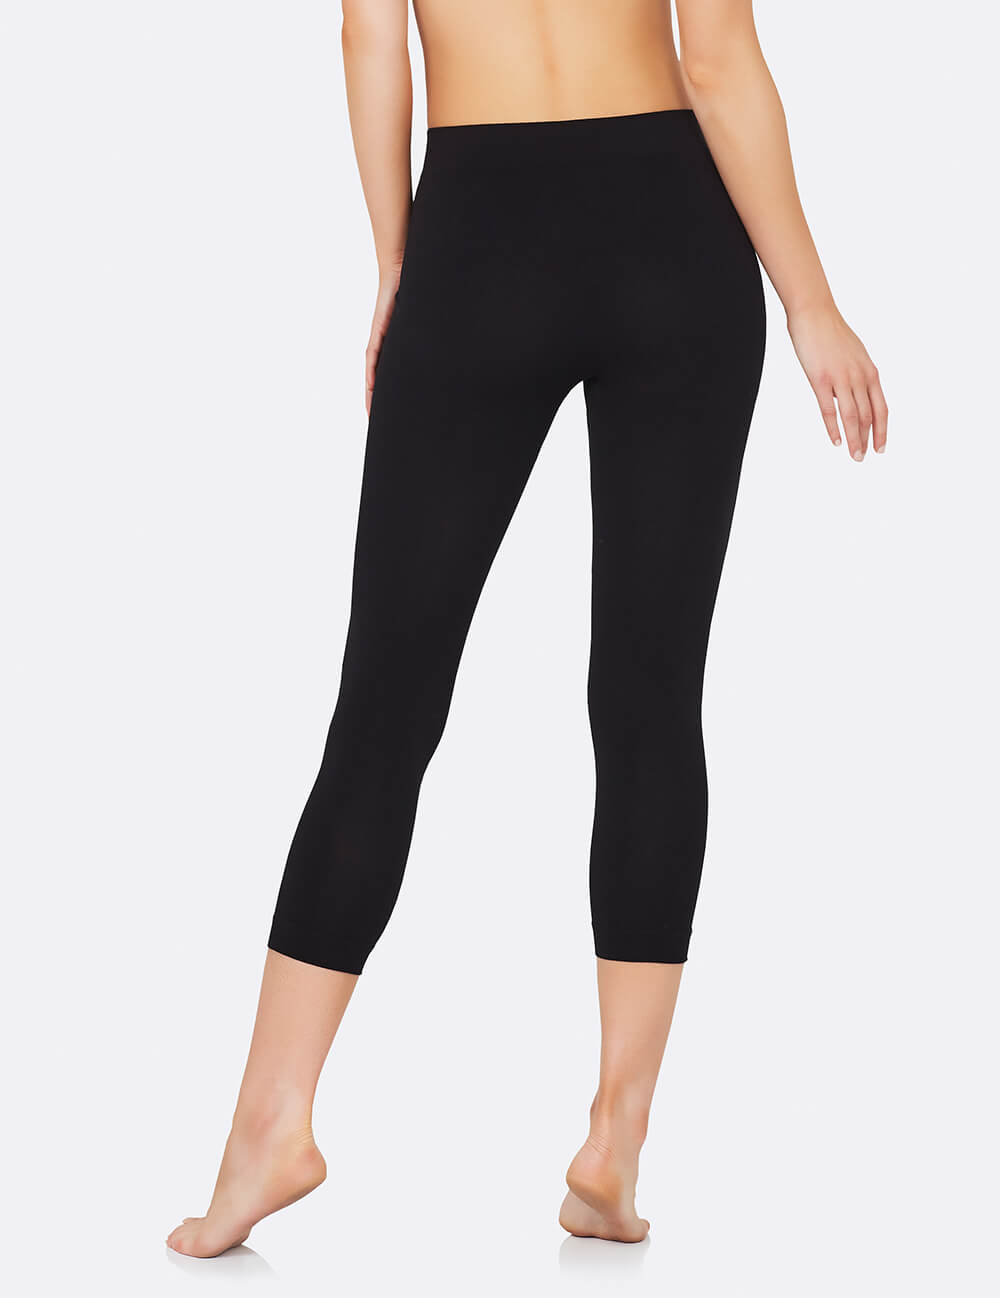 Puma Studio Found Woven 34 Womens Yoga Pants L Buy Puma Studio Found  Woven 34 Womens Yoga Pants L Online at Best Price in India  Nykaa